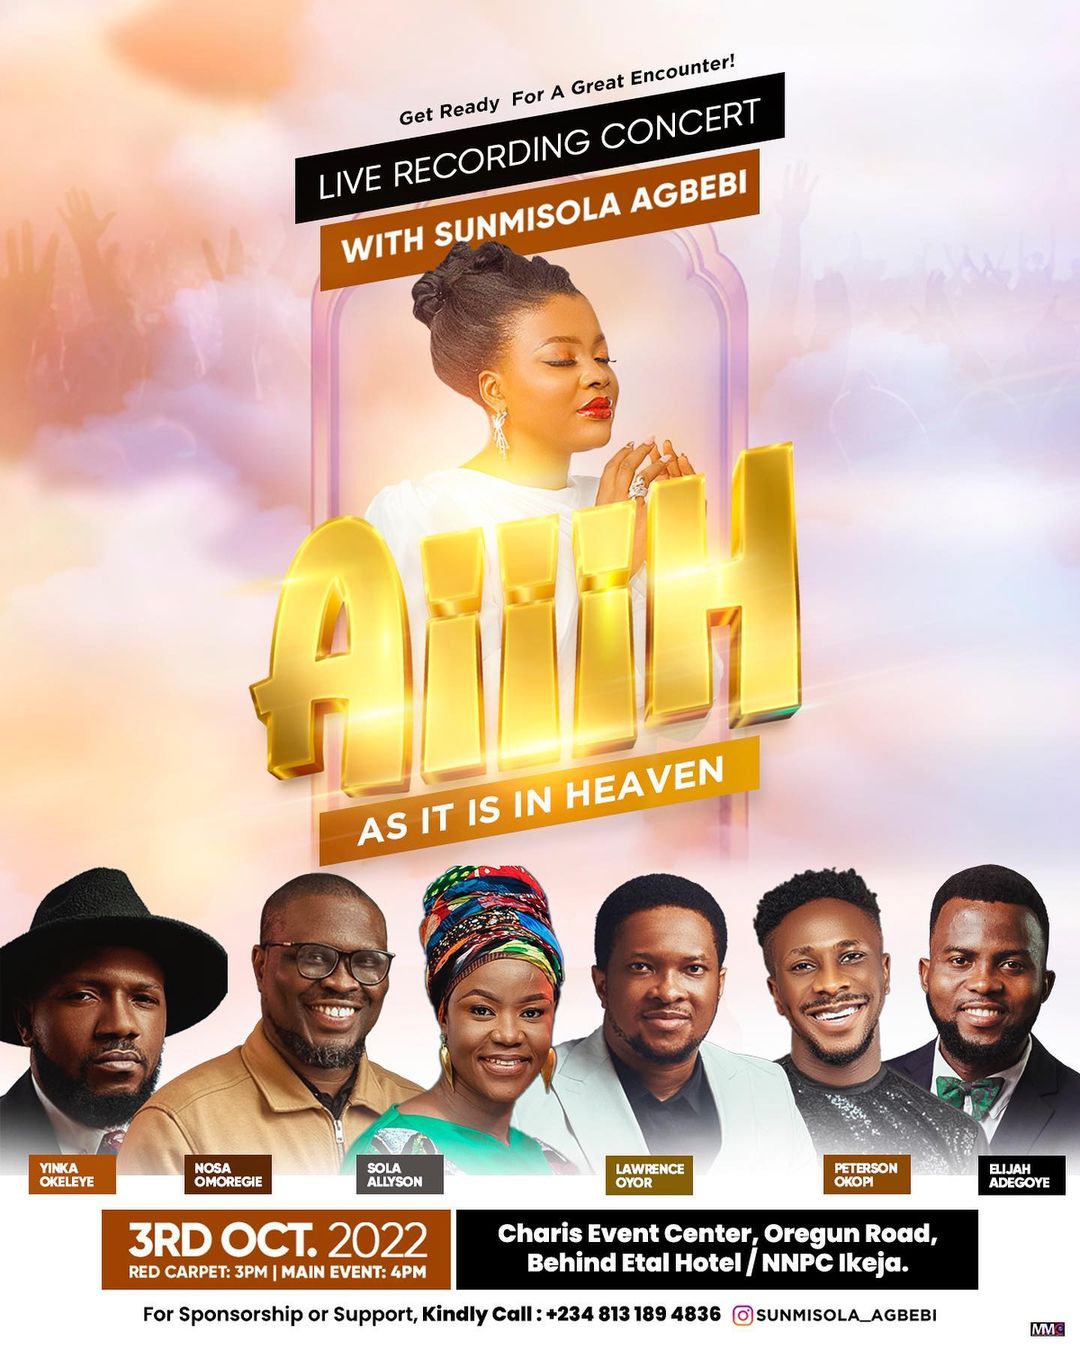 Sunmisola Agbebi Set To Host Live Recording Concert - "As It Is In Heaven"